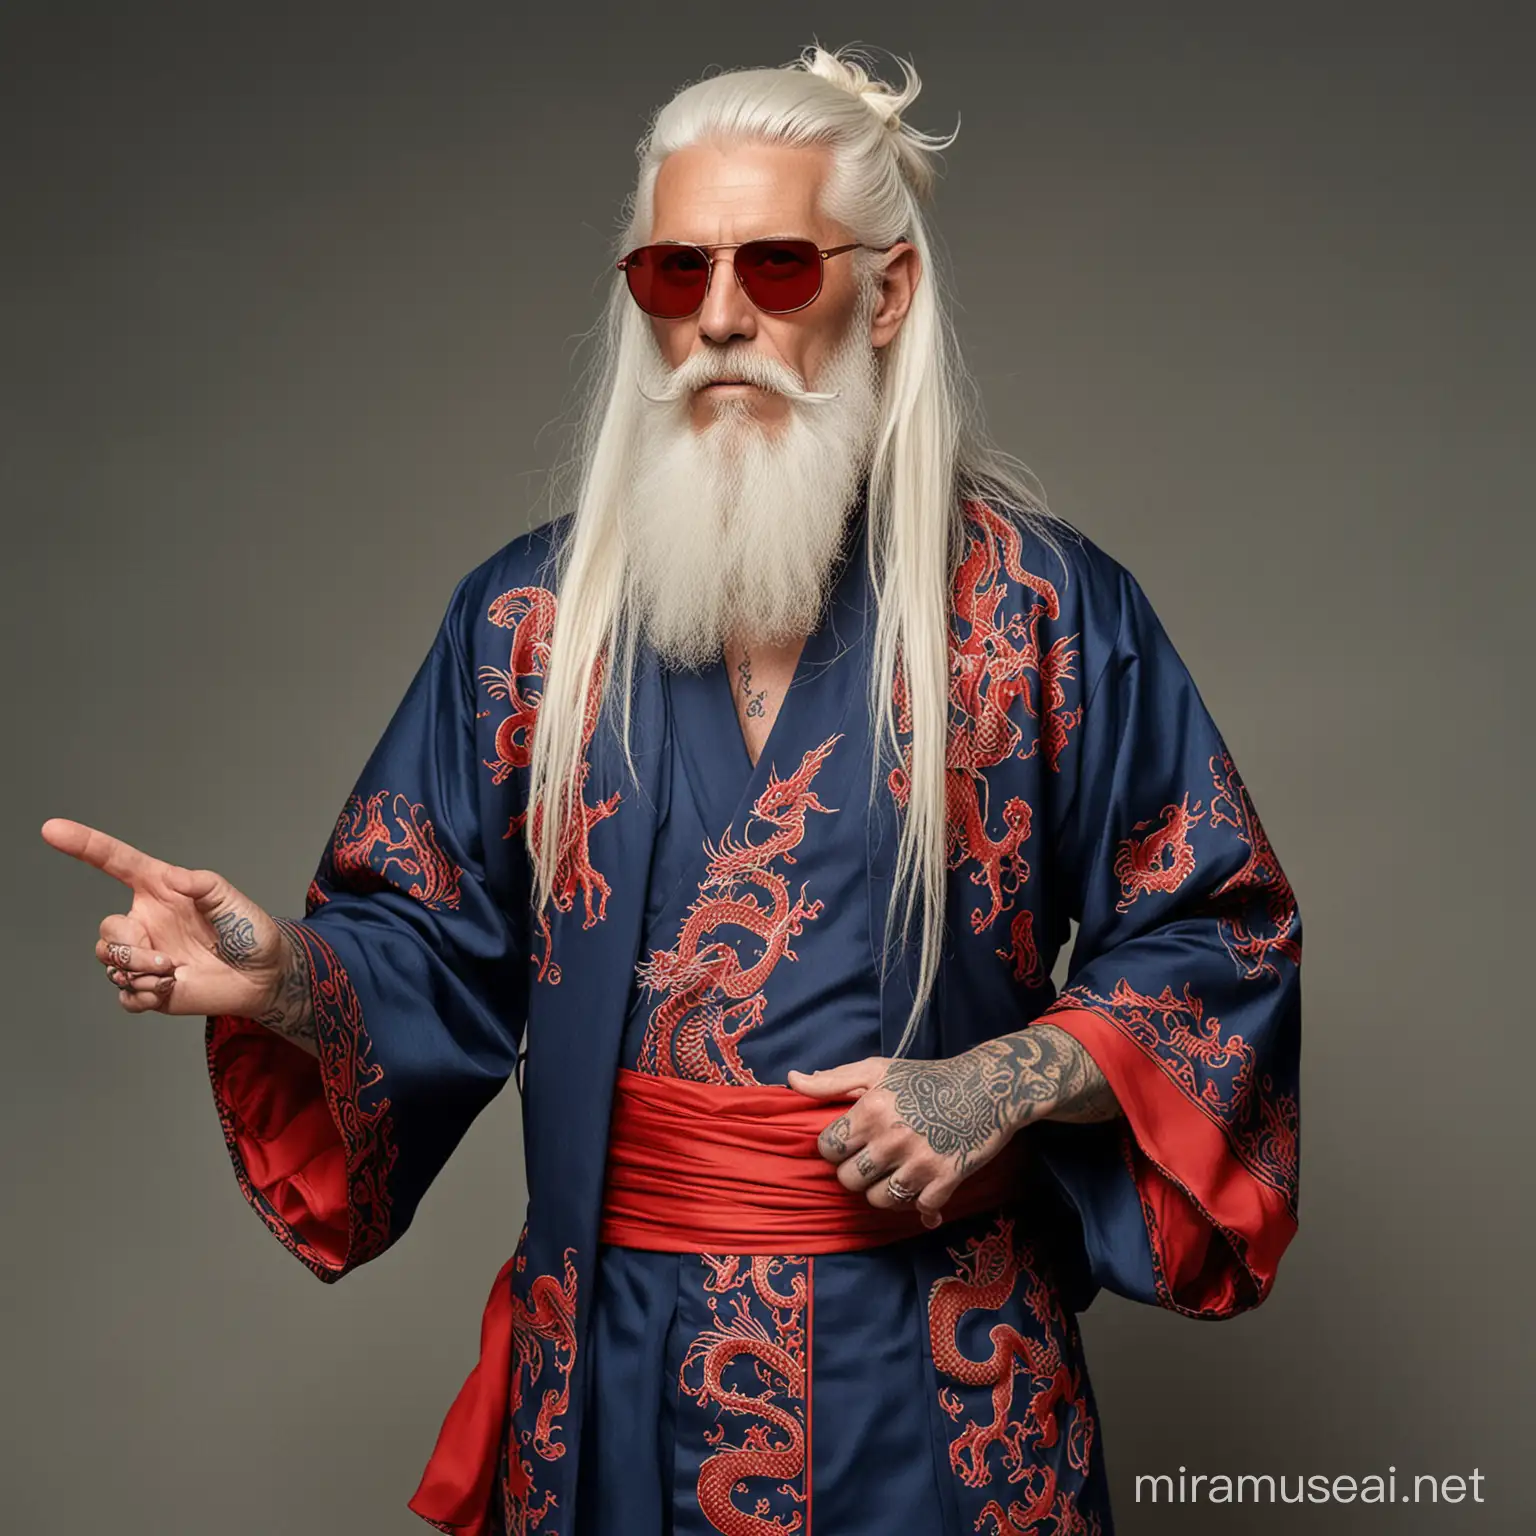 Old west preacher's with long white hair, long white beard, red sunglasses, wearing a blue kimono with red dragon embroidery and red silk boxers. Bare torso covered in tattoos.